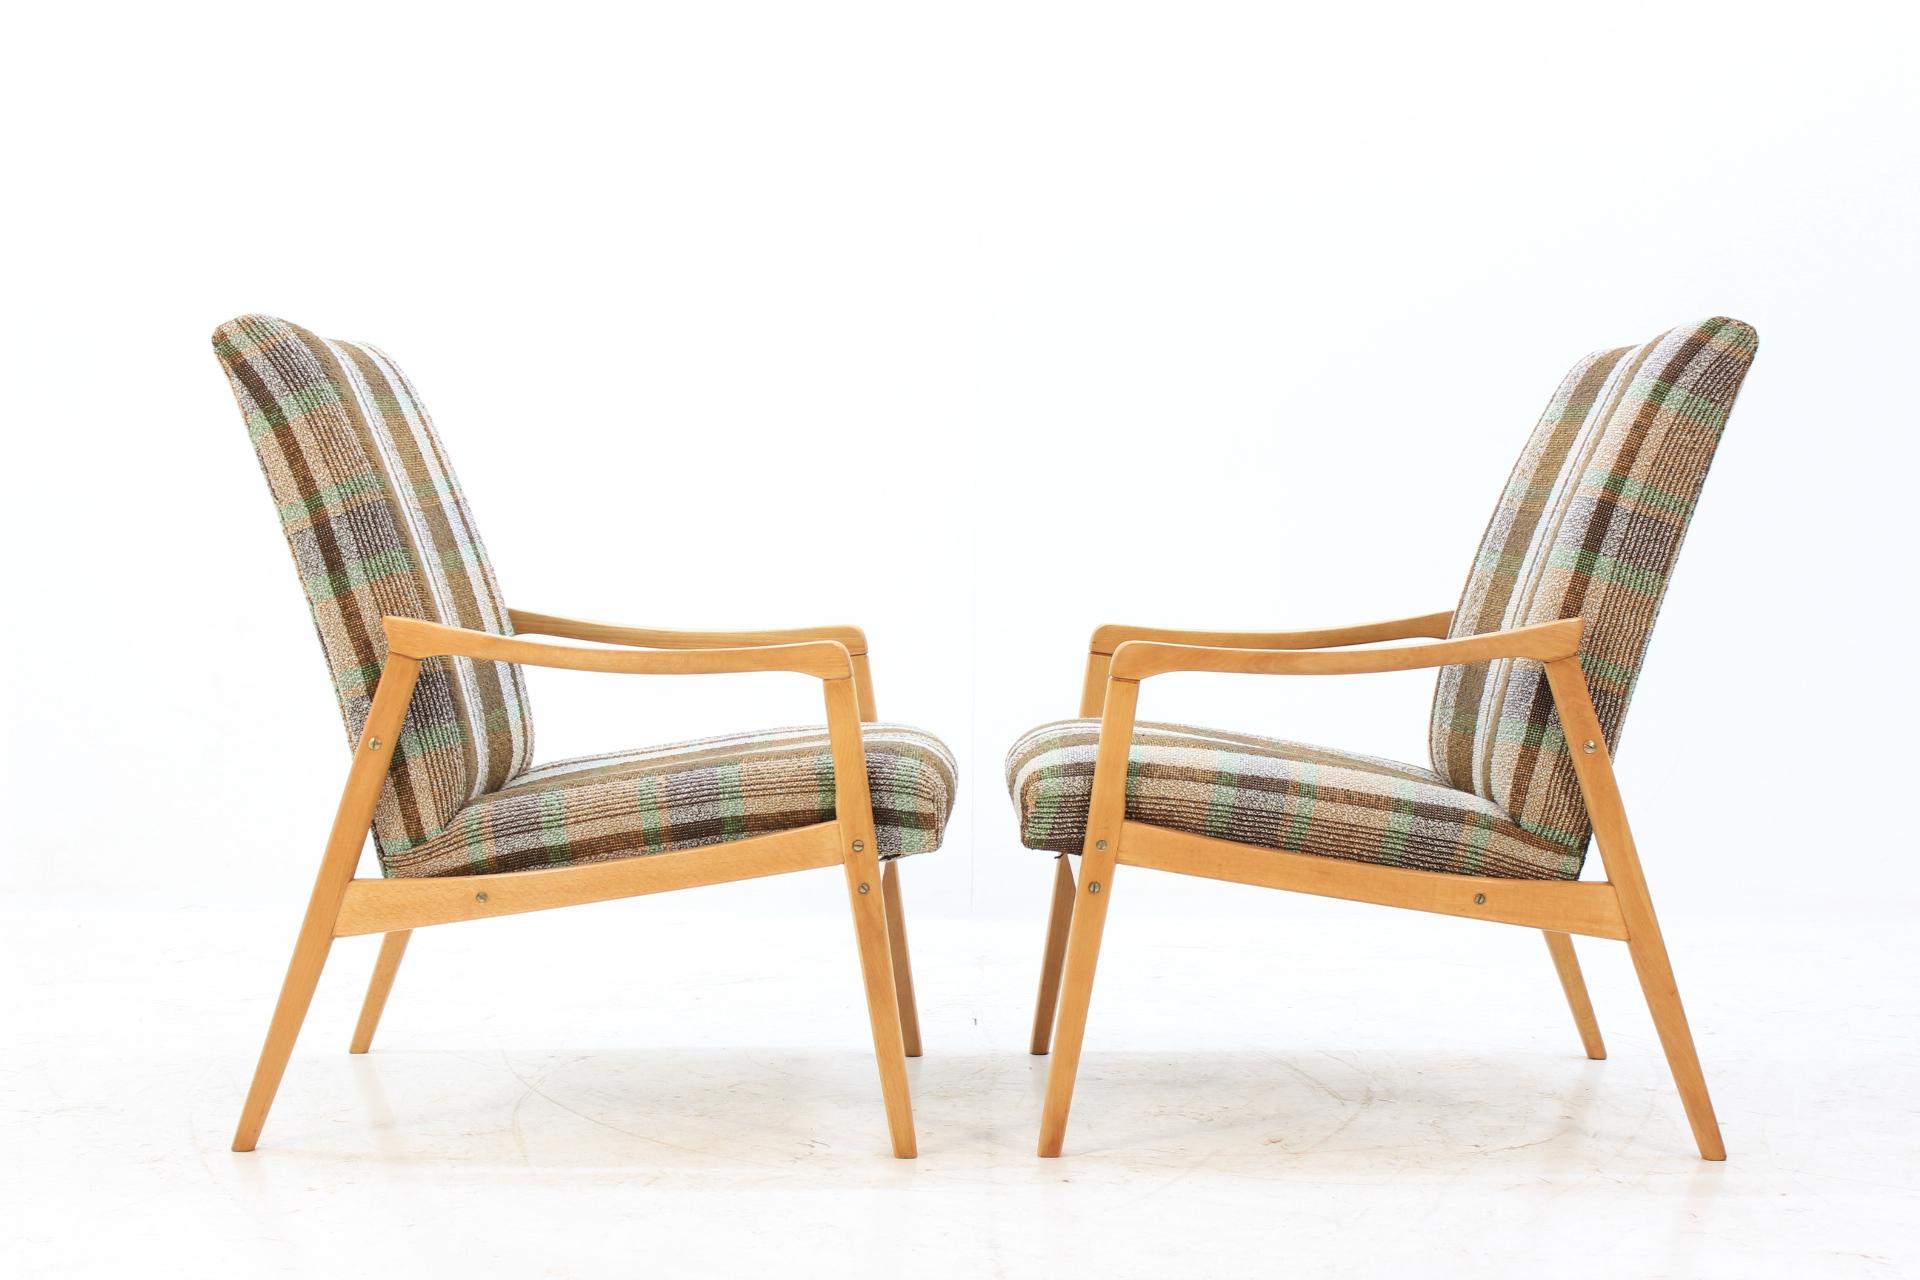 The items made of oak wood and original upholstery. Chairs made in Czechoslovakia. Partly restored.